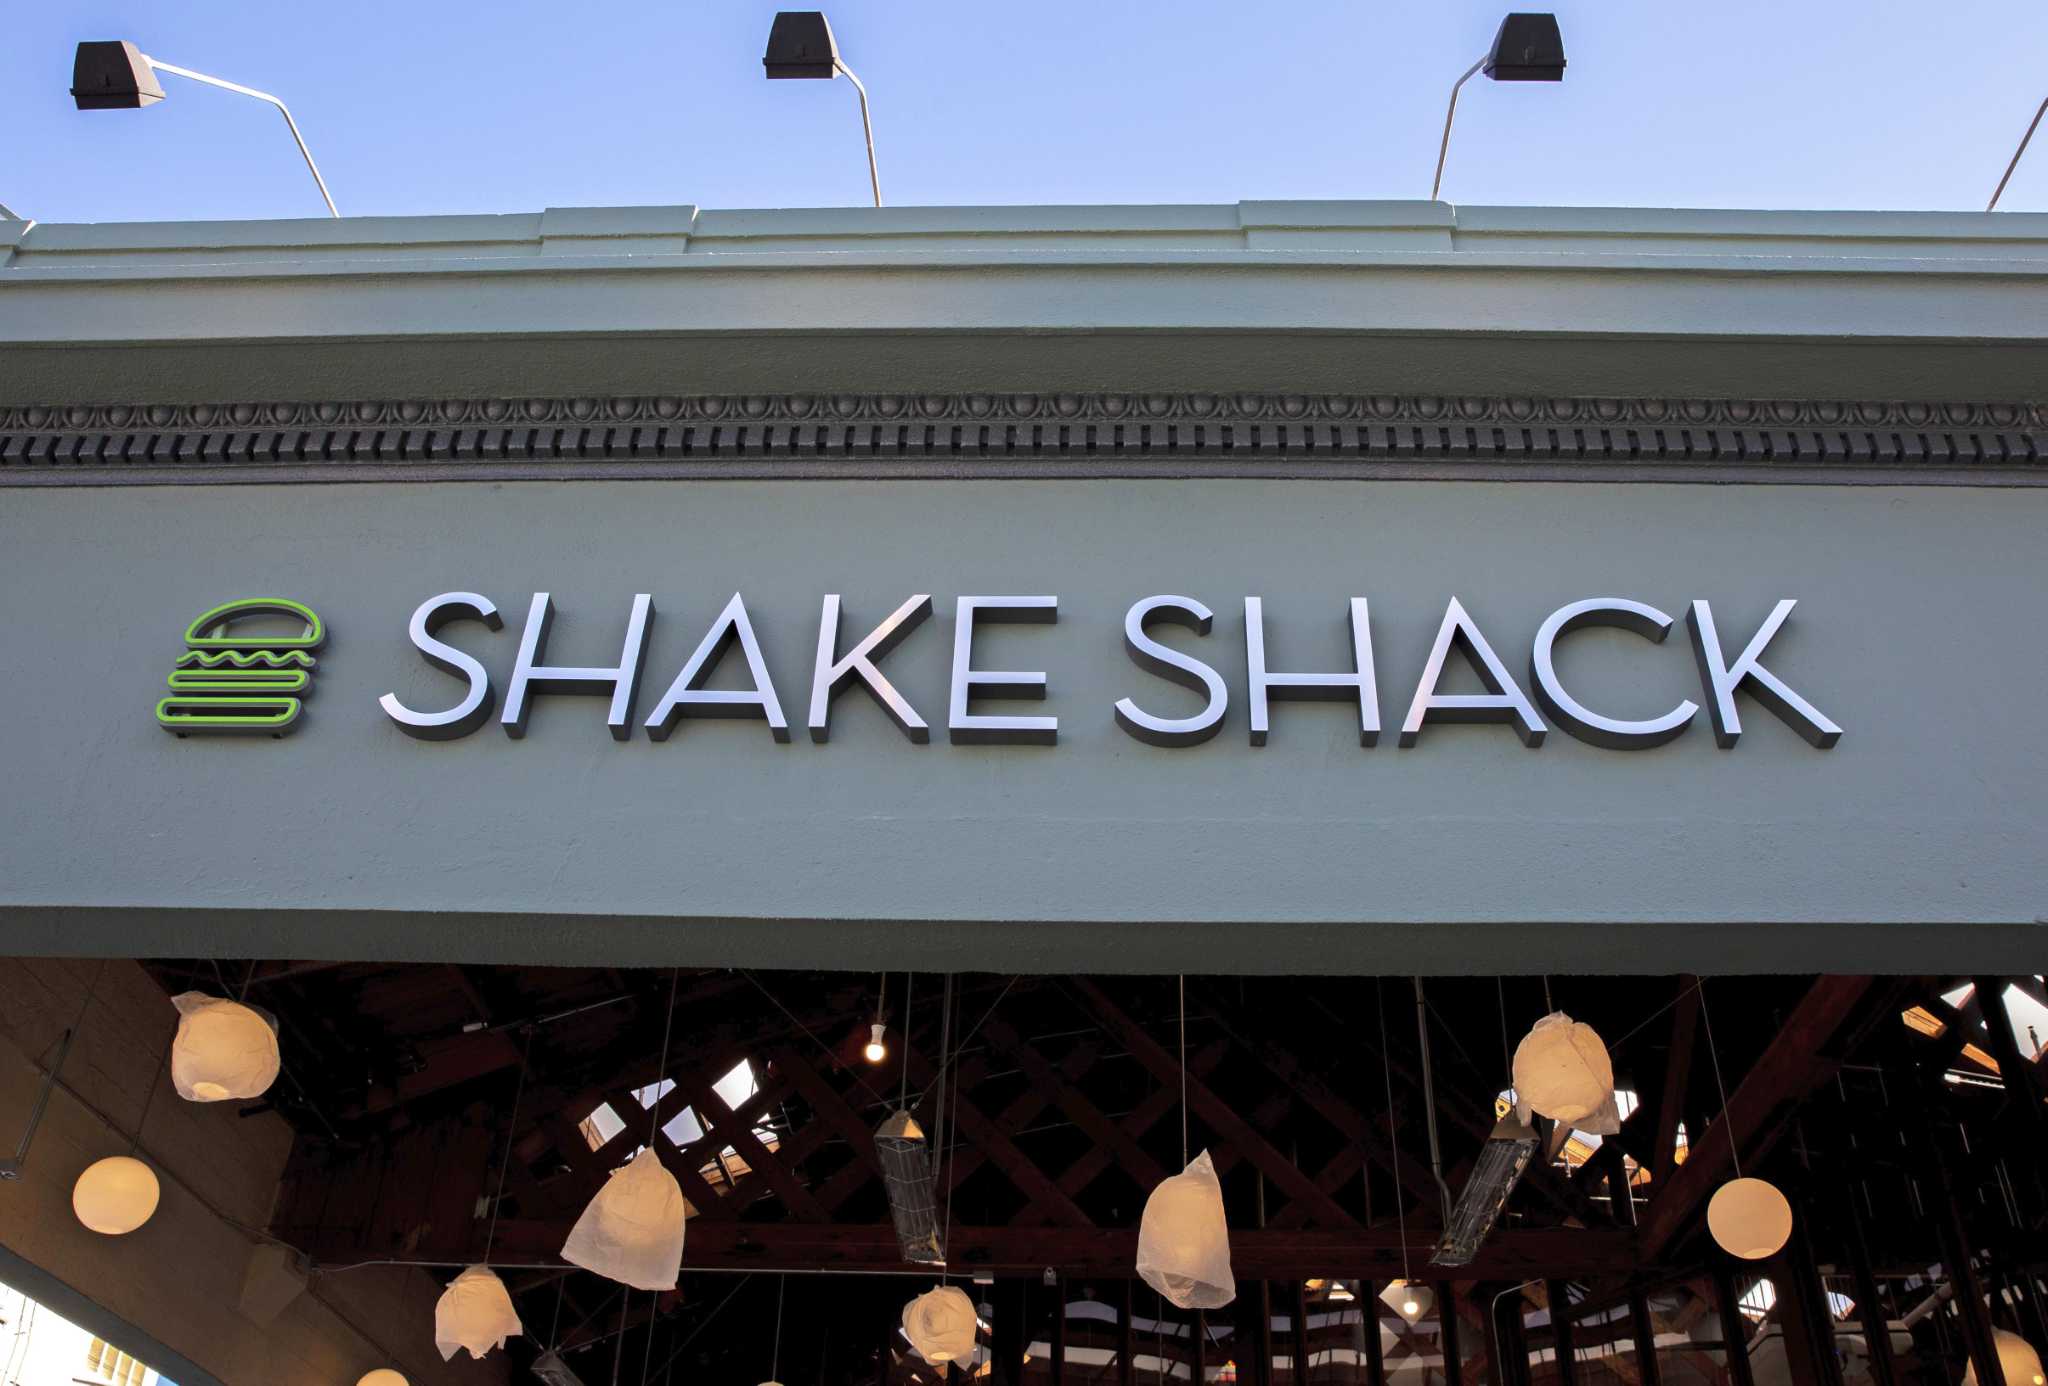 Garden State Plaza Shake Shack is now open